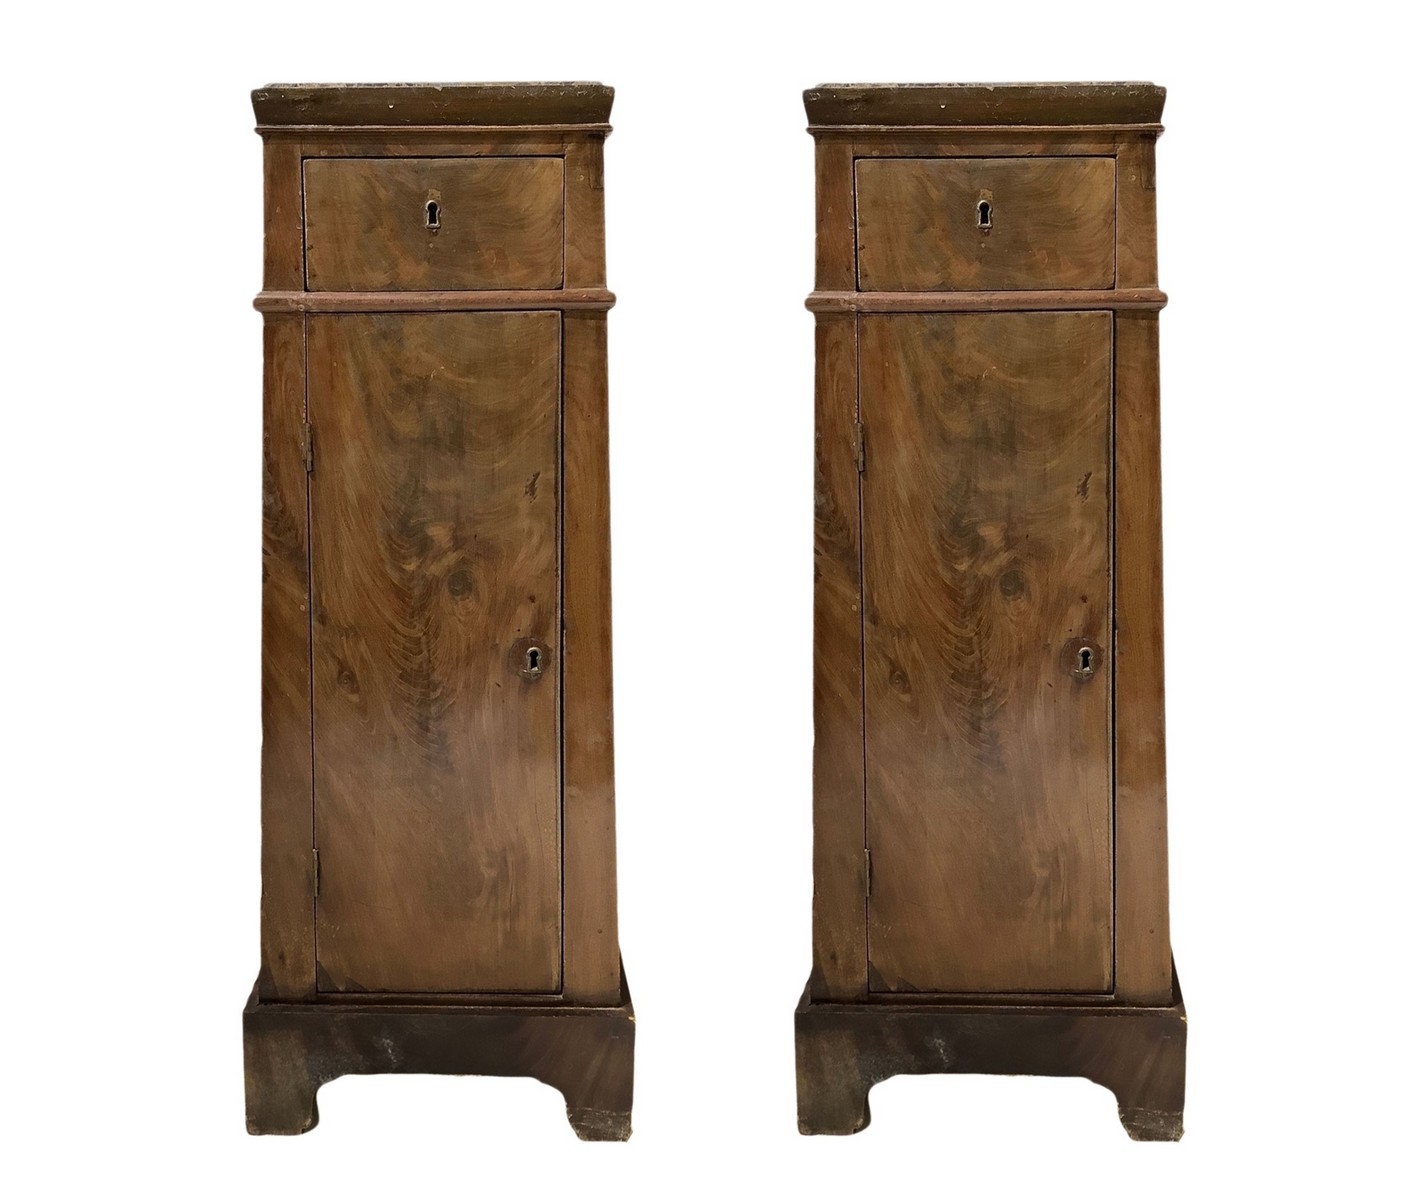 Pair of bedside tables in briar walnut, truncated pyramid, Early 19th century, Sicily - Image 2 of 5